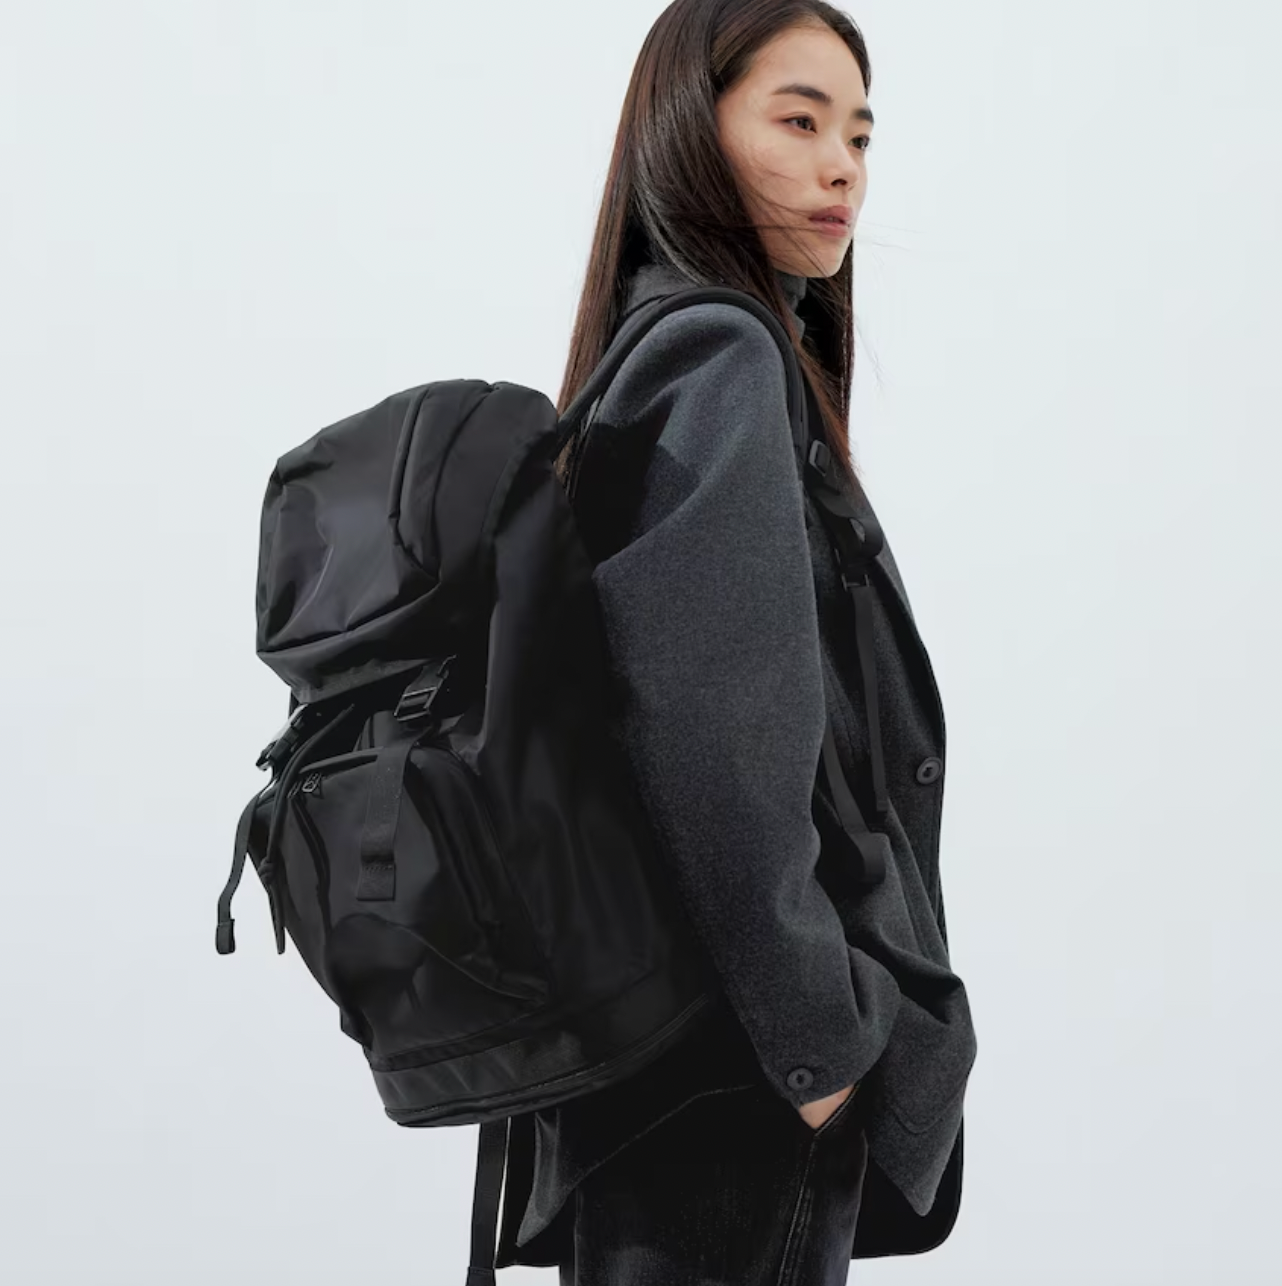 Sweaty Betty All Sport Back Pack - New with Tags - black Rose gold